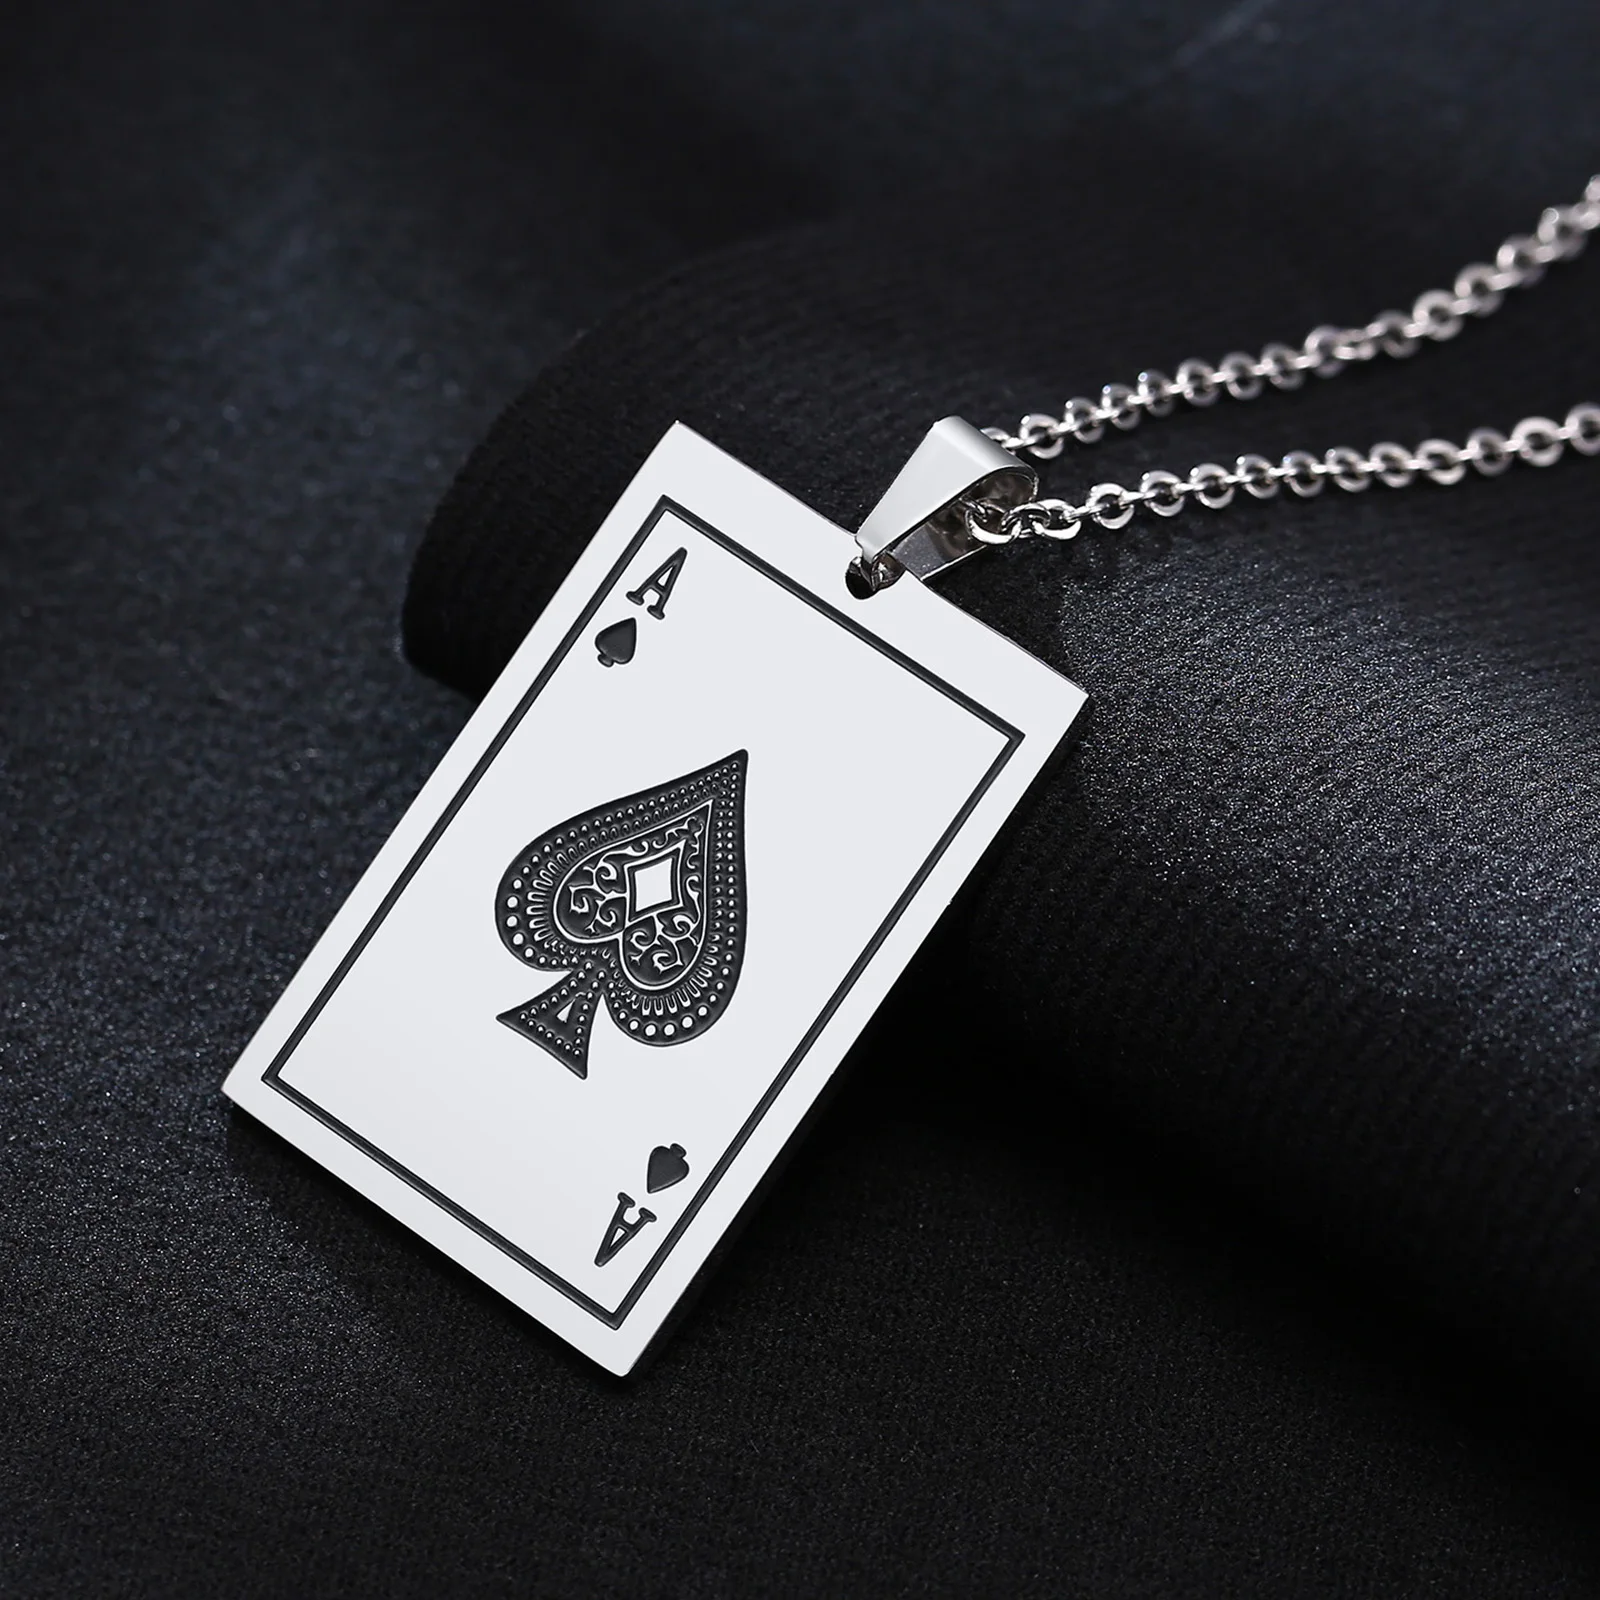 Ace of spades necklace meaning